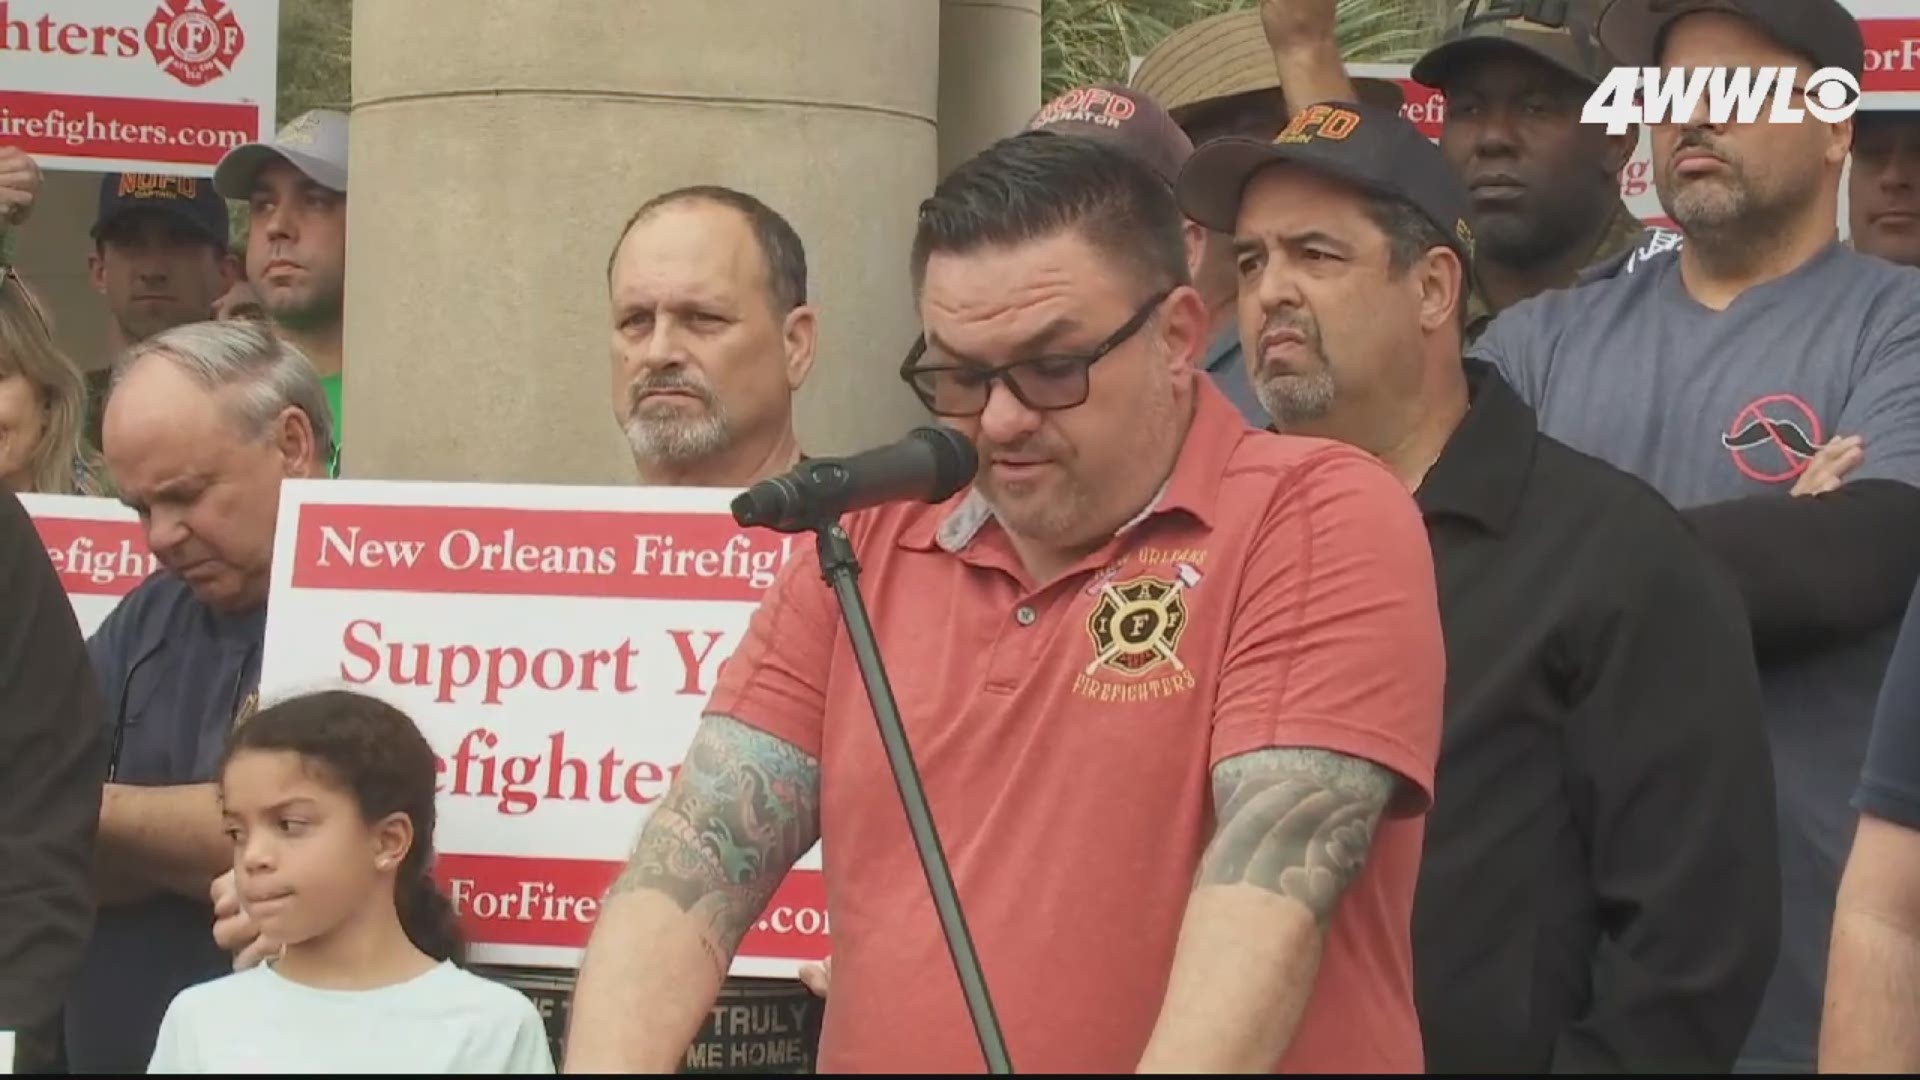 Complaining about being understaffed and overworked, New Orleans firefighters laid out their case at a press conference Monday afternoon.